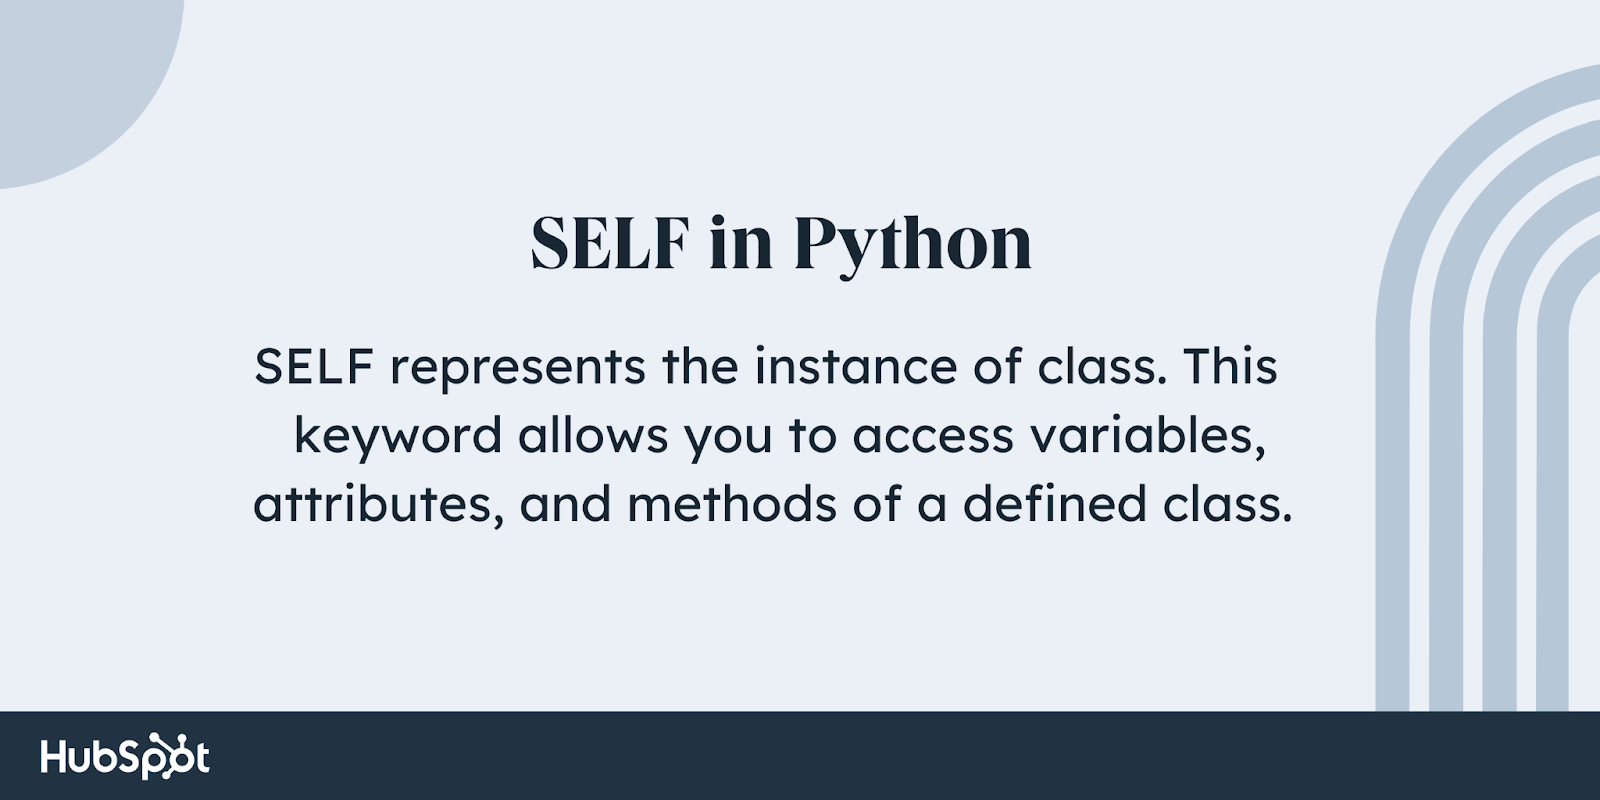 How to Use SELF in Python